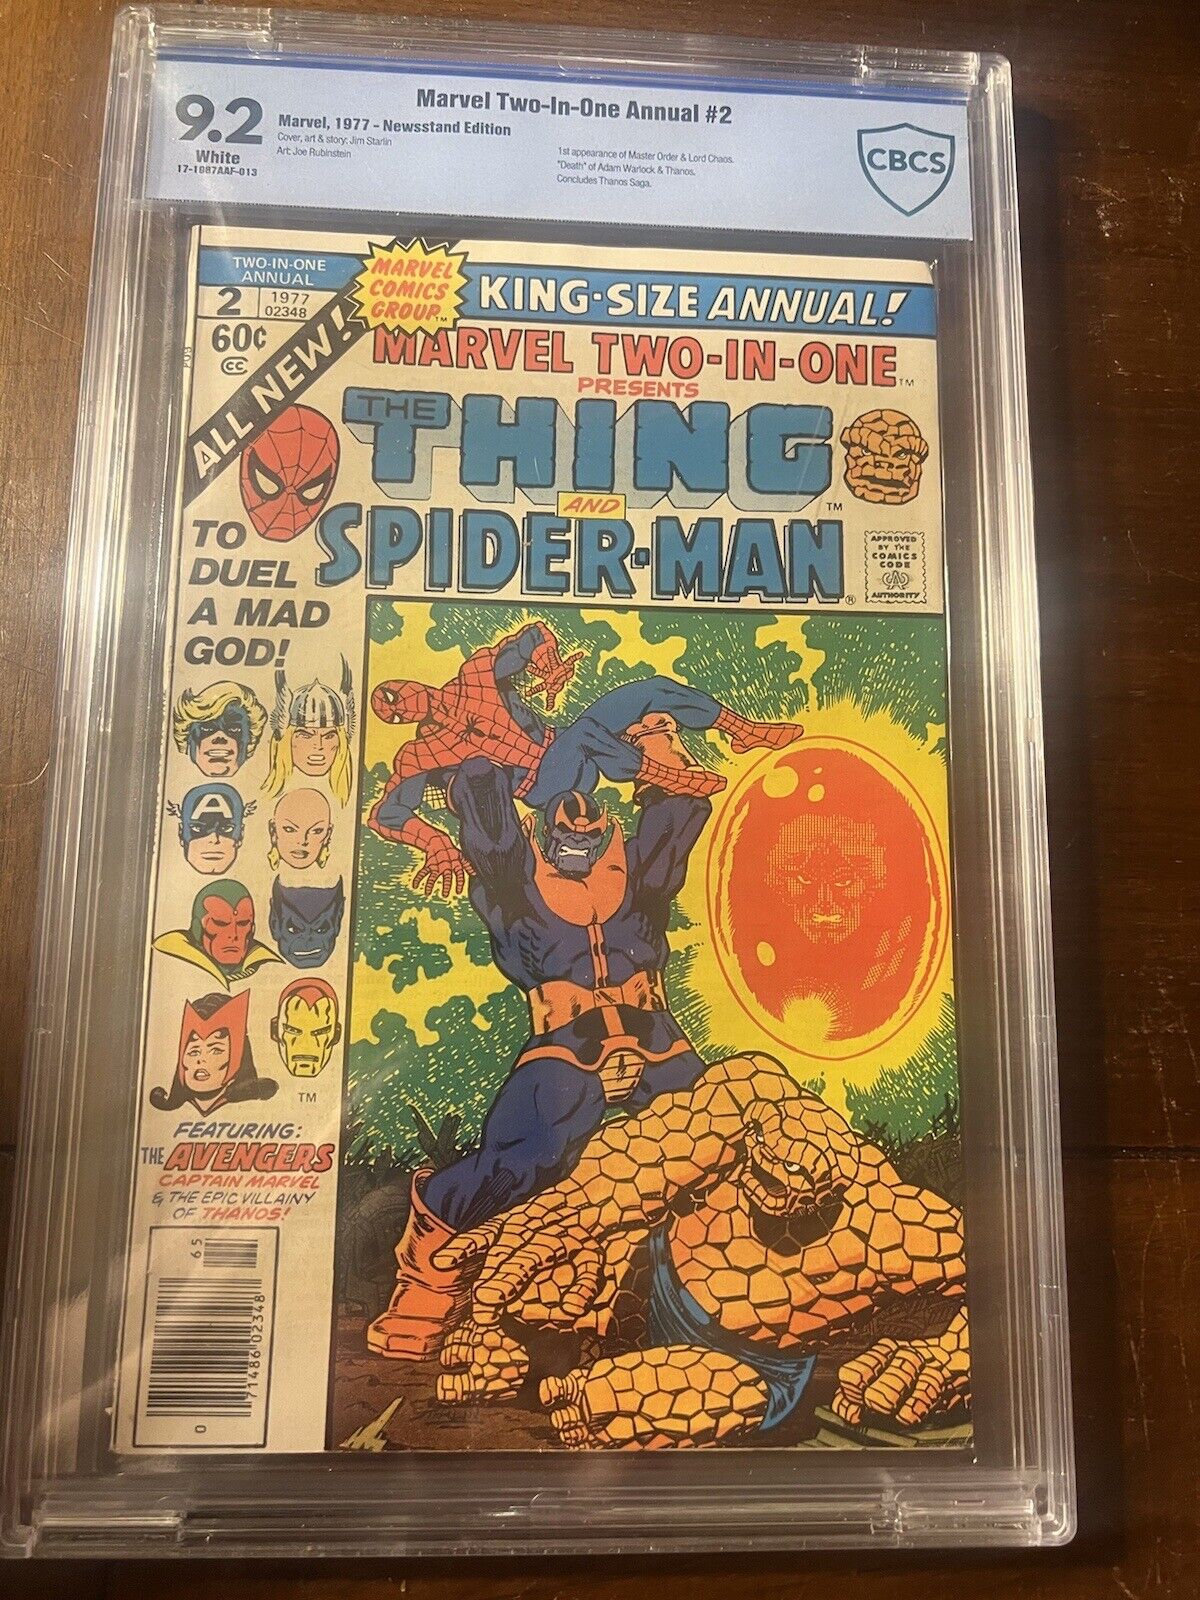 MARVEL TWO-IN-ONE #2 1977 CBCS 9.2 WHITE KEY ISSUE - THANOS CHEAP SLAB